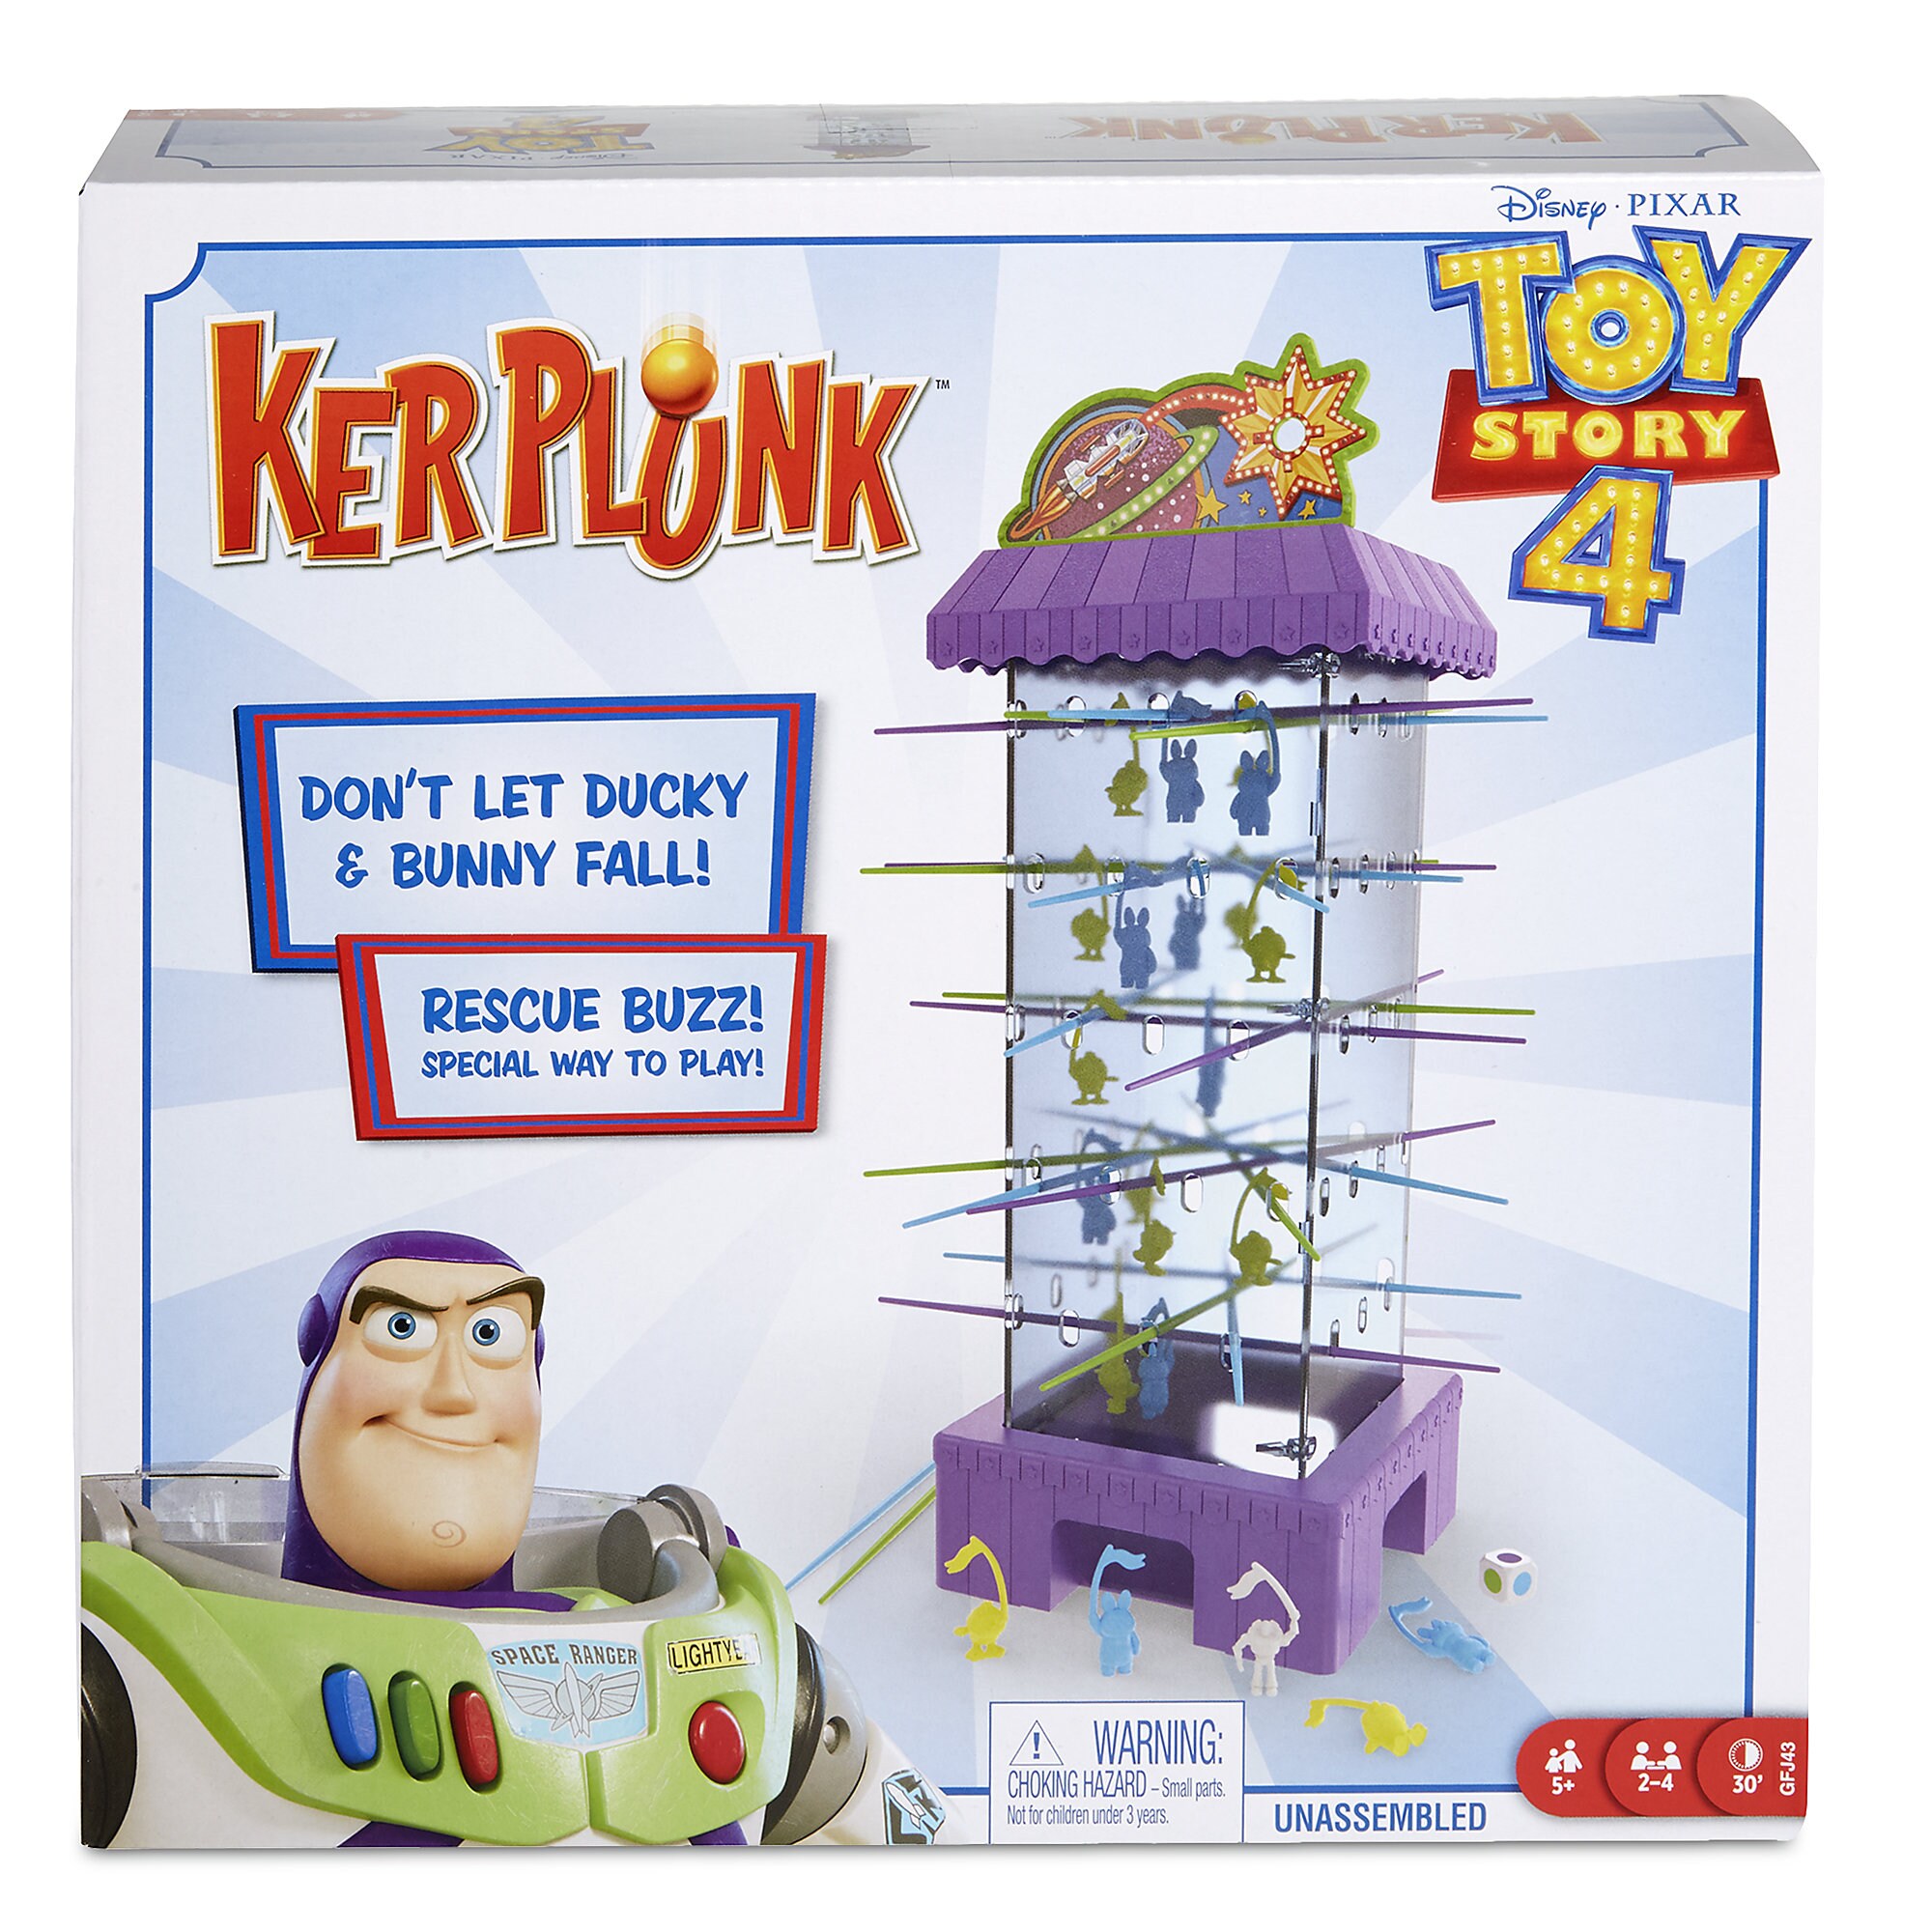 Toy Story 4 Kerplunk was released today